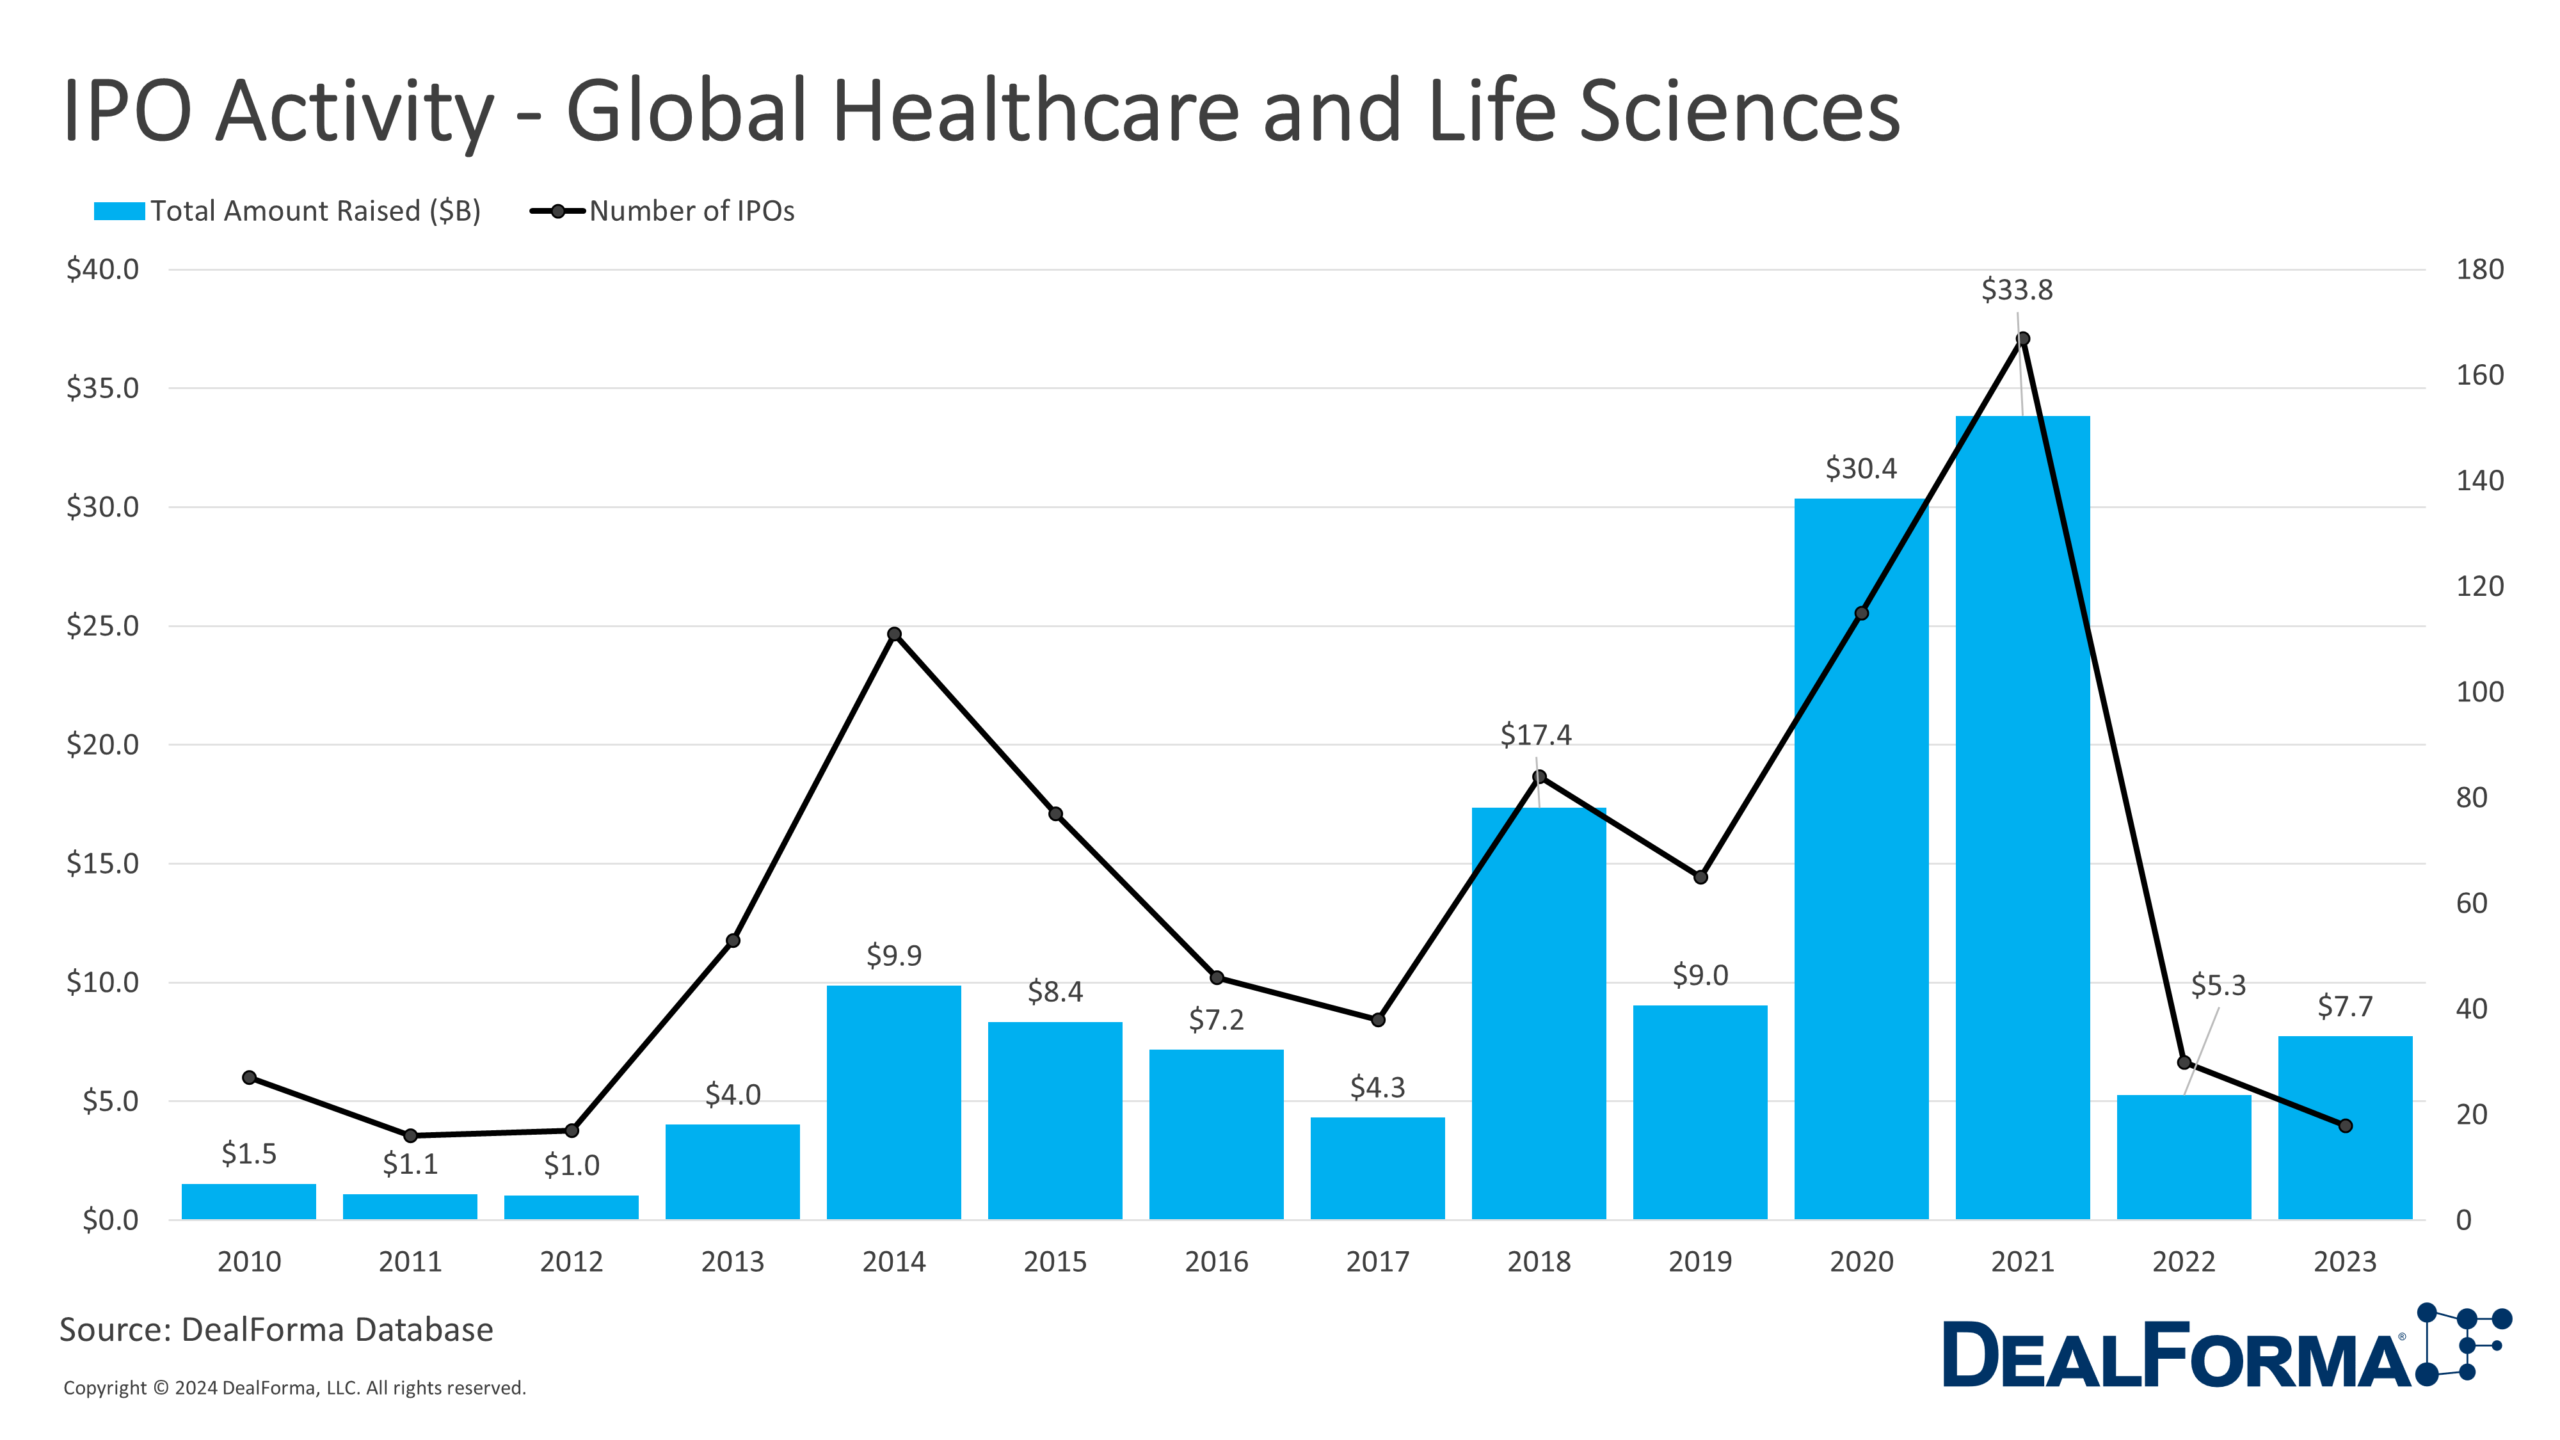 IPO Activity - Global Healthcare and Life Sciences